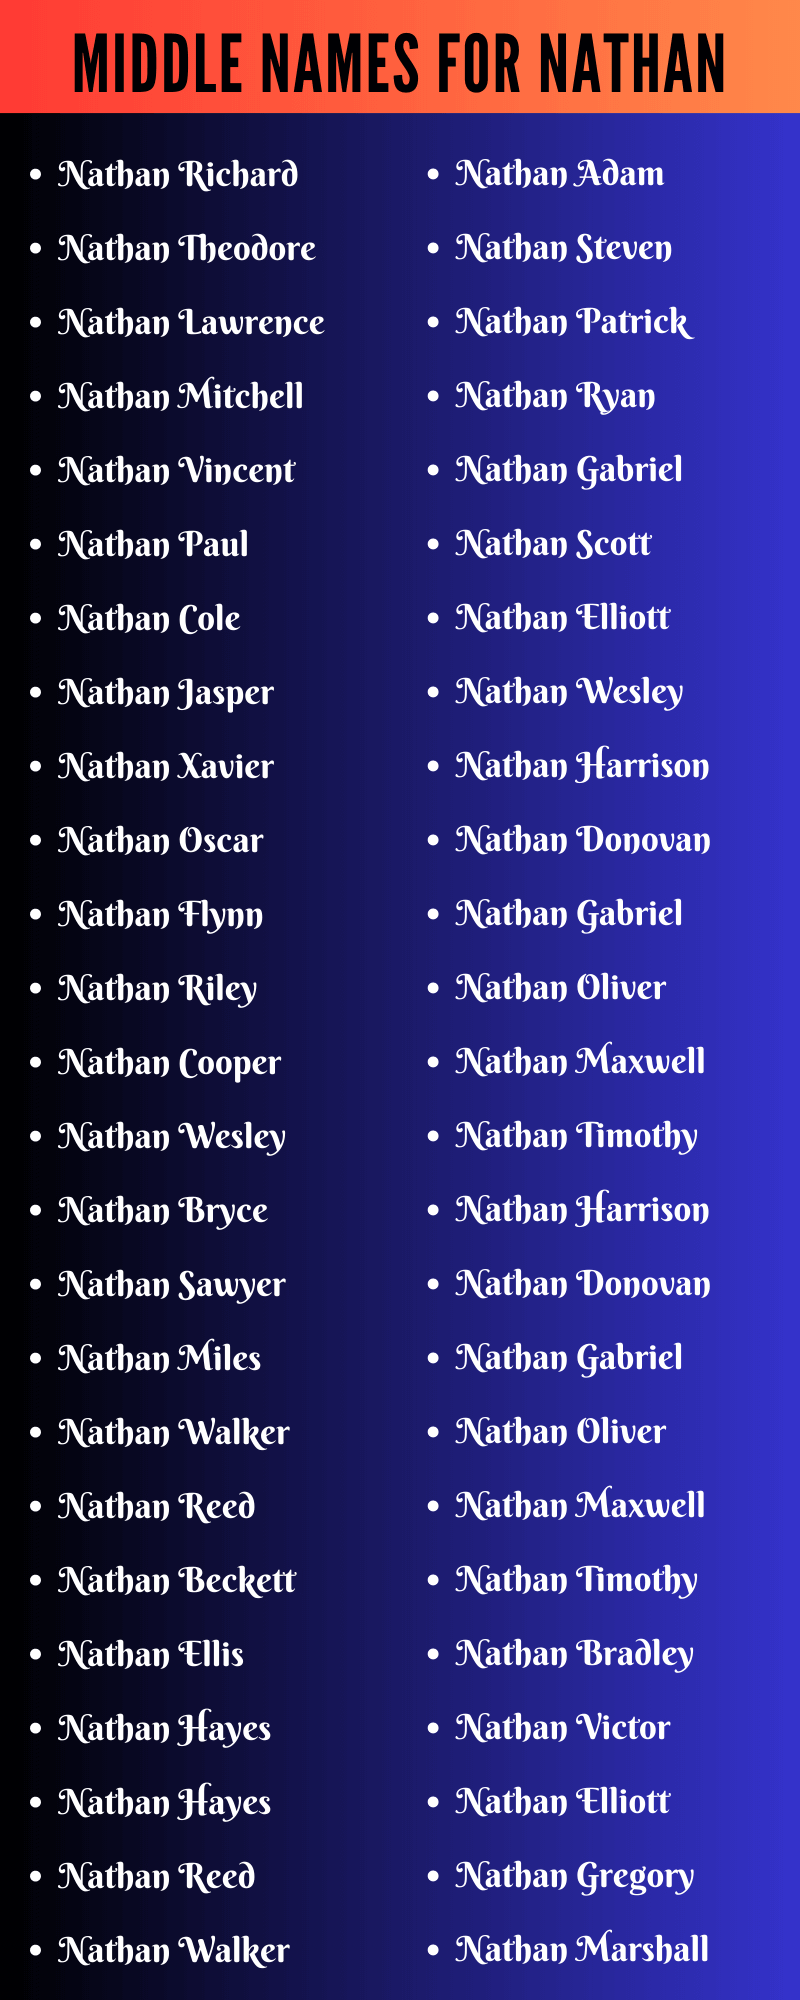 Middle Names For Nathan